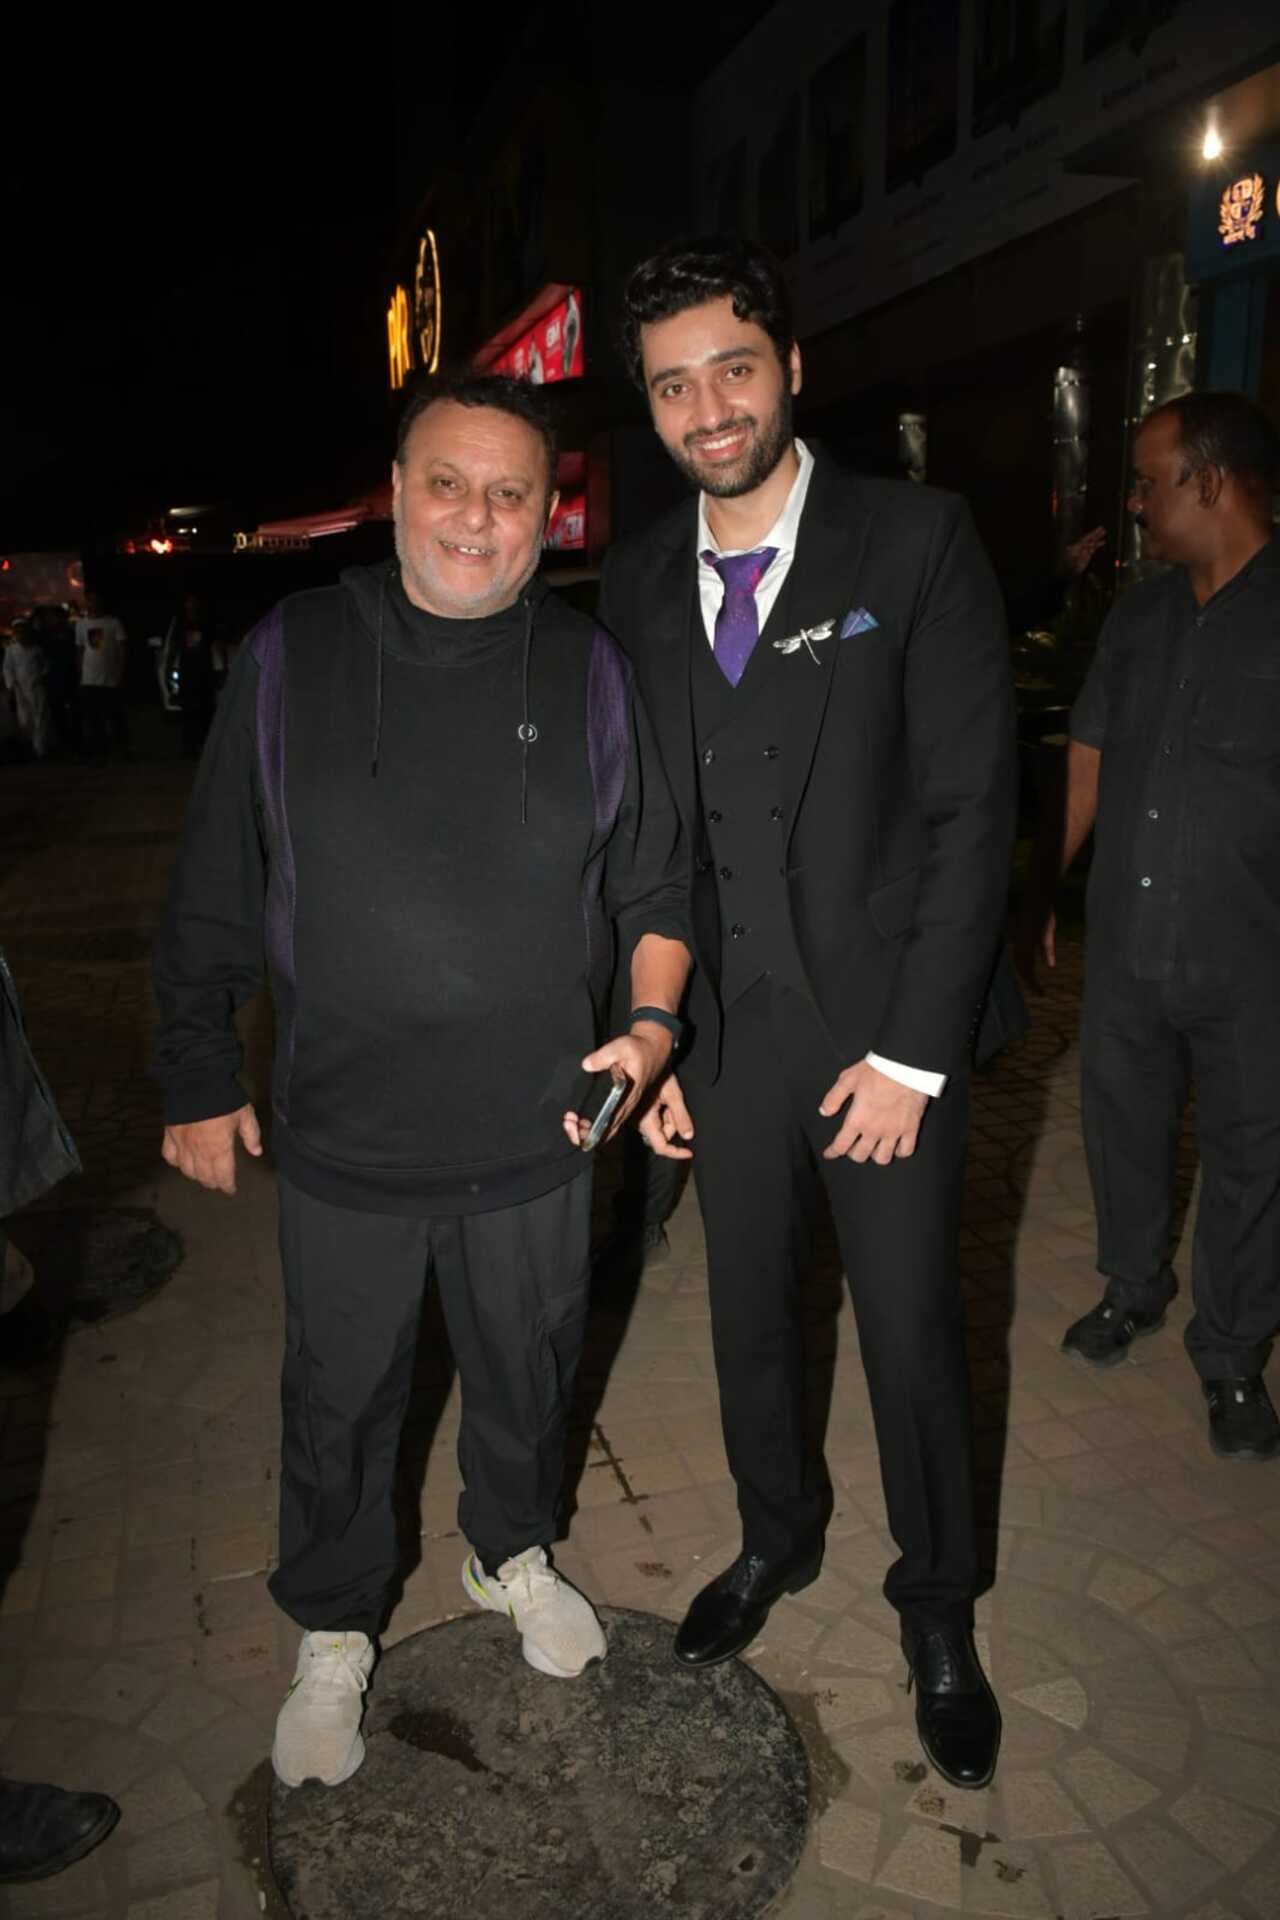 Actor Utkarsh Sharma, who plays Sunny and Ameesha's son in the film, was seen enjoying the moment